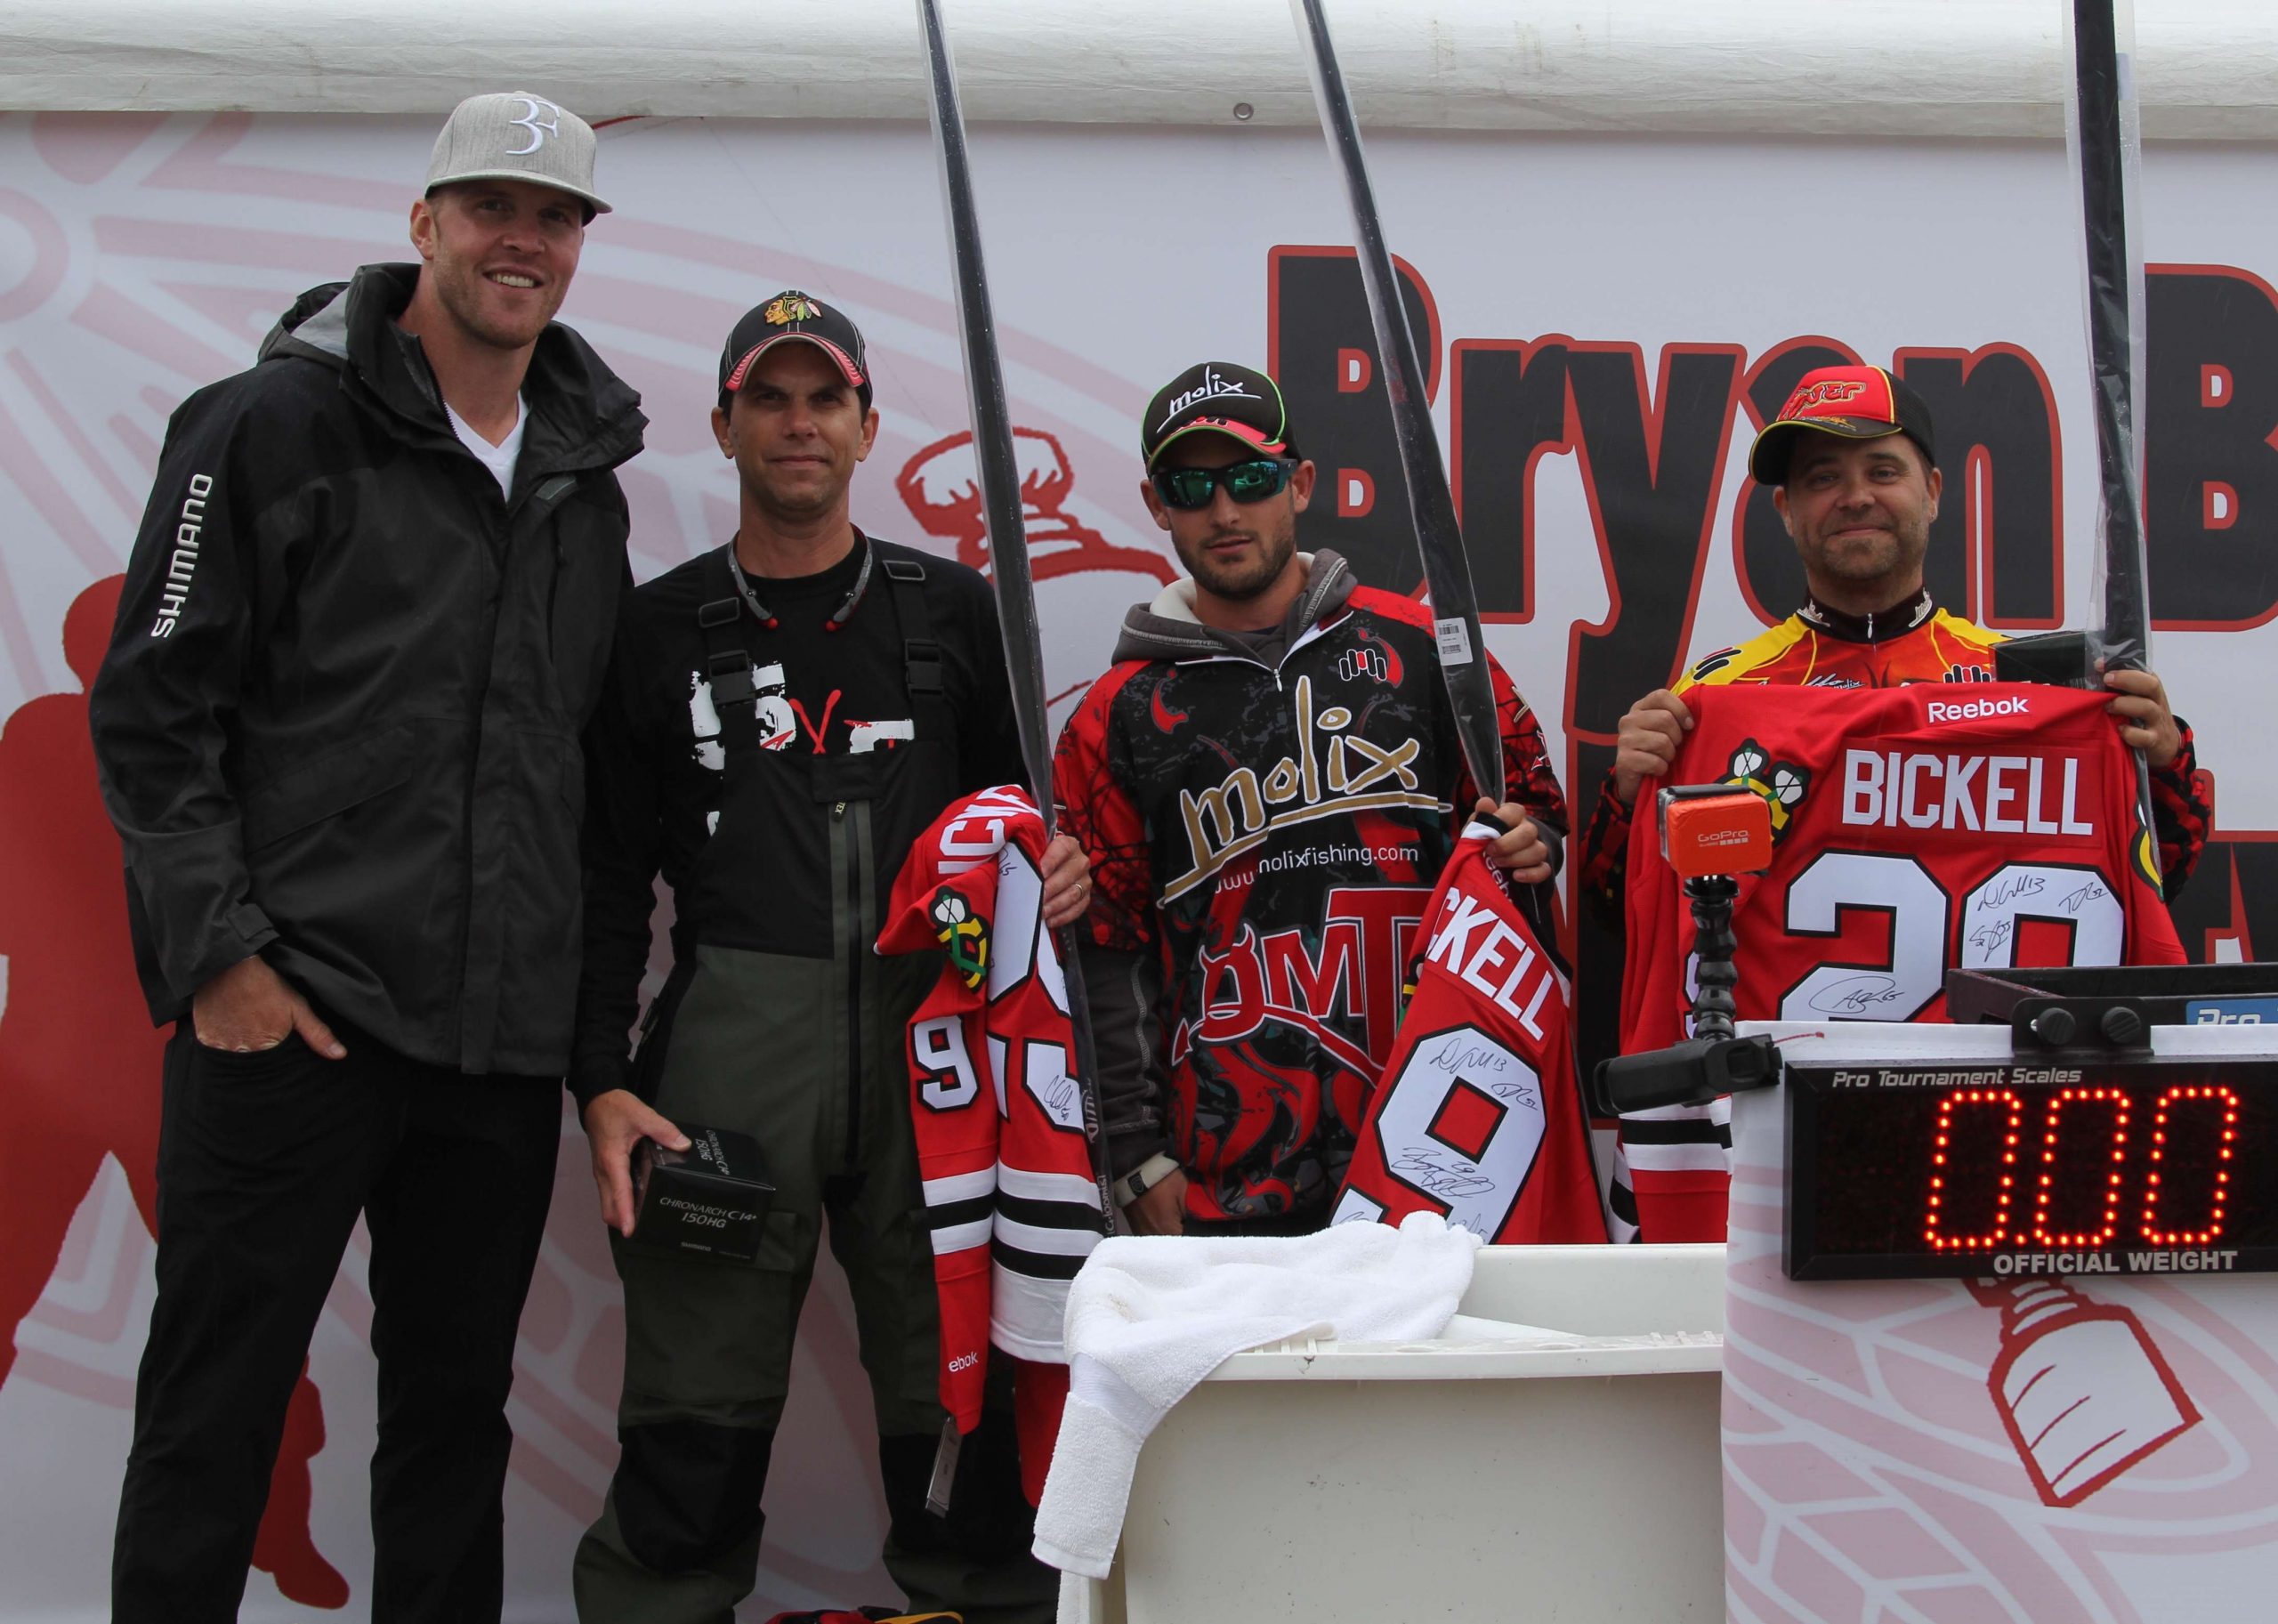 The team of Casey Tucker, Mike Gentile, and Mike Morrel won with a 12.68-pound total. The bulk of their catch came on a dropshot rig with Molix soft plastic.